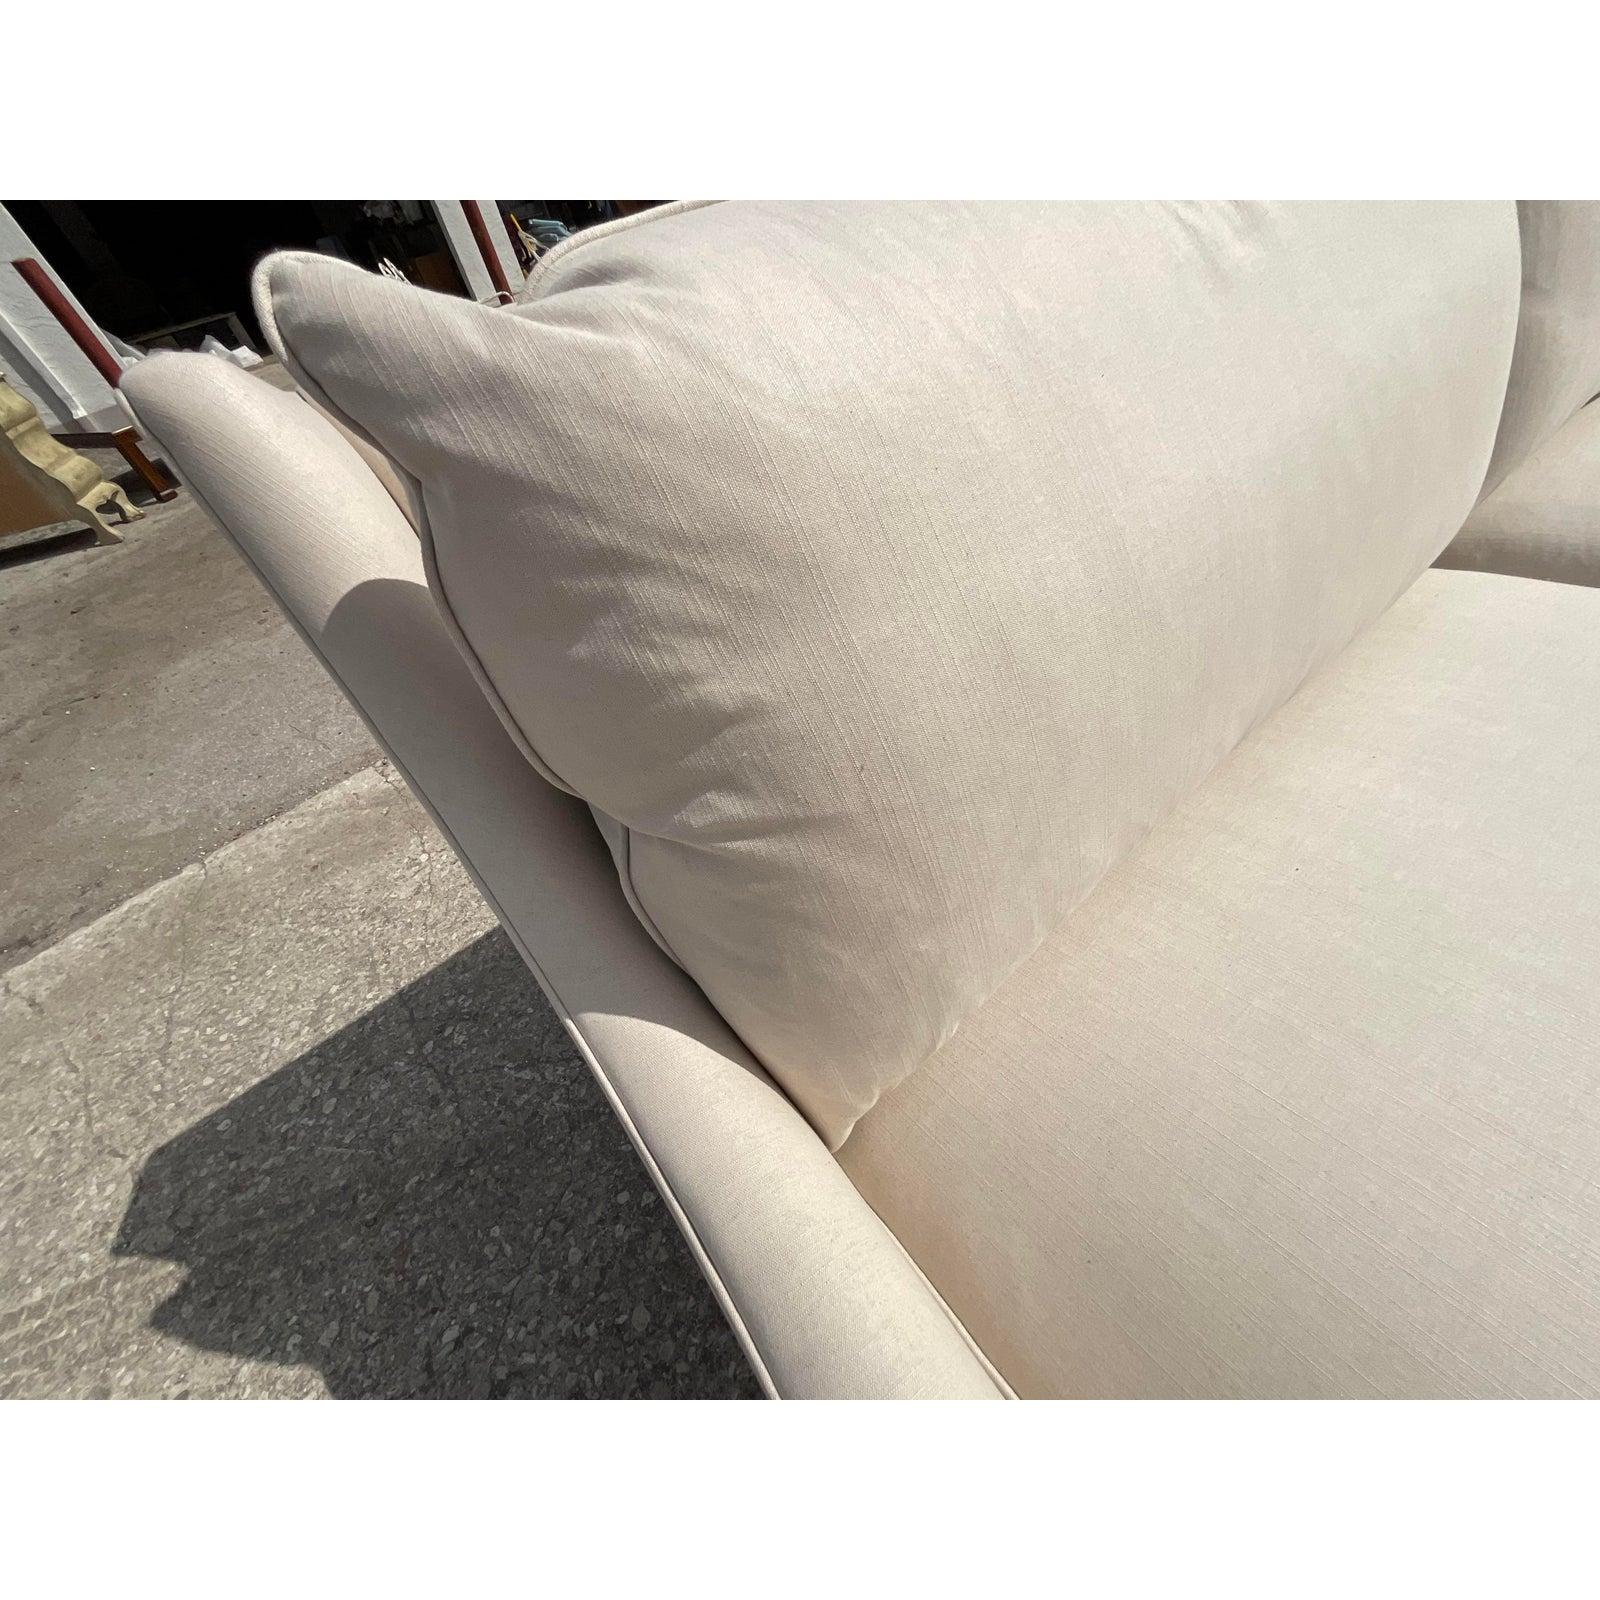 Incredible custom Highland House sofa. Designed by Celerie Kemble in a pale flax color with pale green trim at the bottom. Two sofas available to create a pair if desired. Price is for one. Acquired from a Hibe Sound estate.